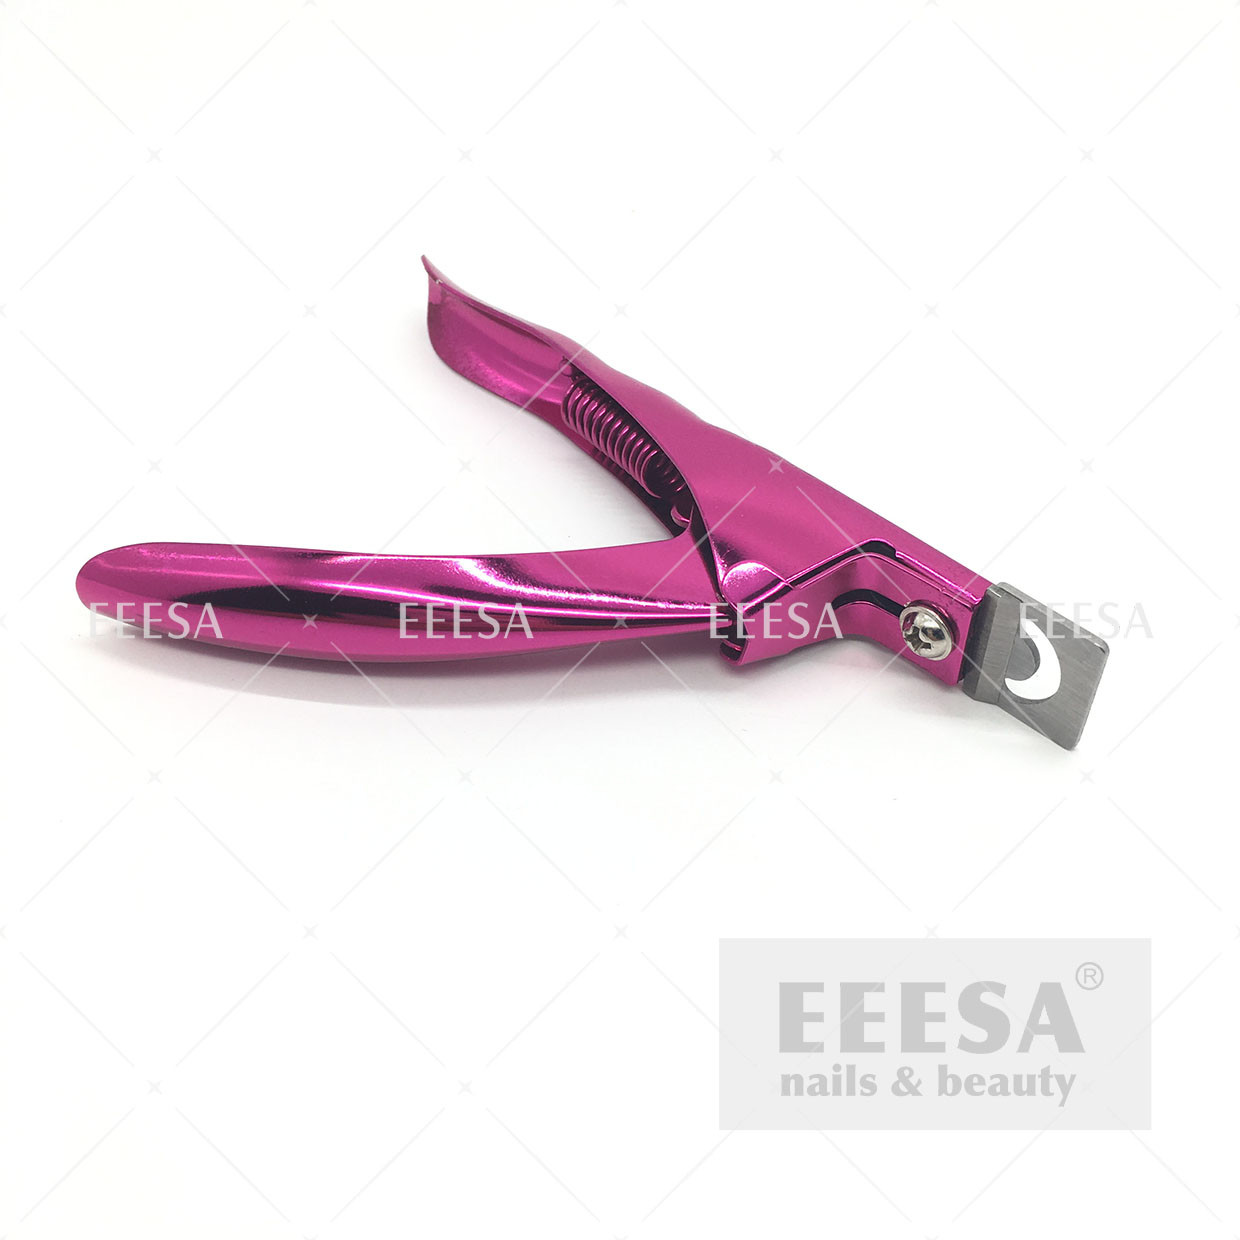  Curved Edge Nail Cuticle Cutter Well Cut  For Acrylic False Nails Manufactures